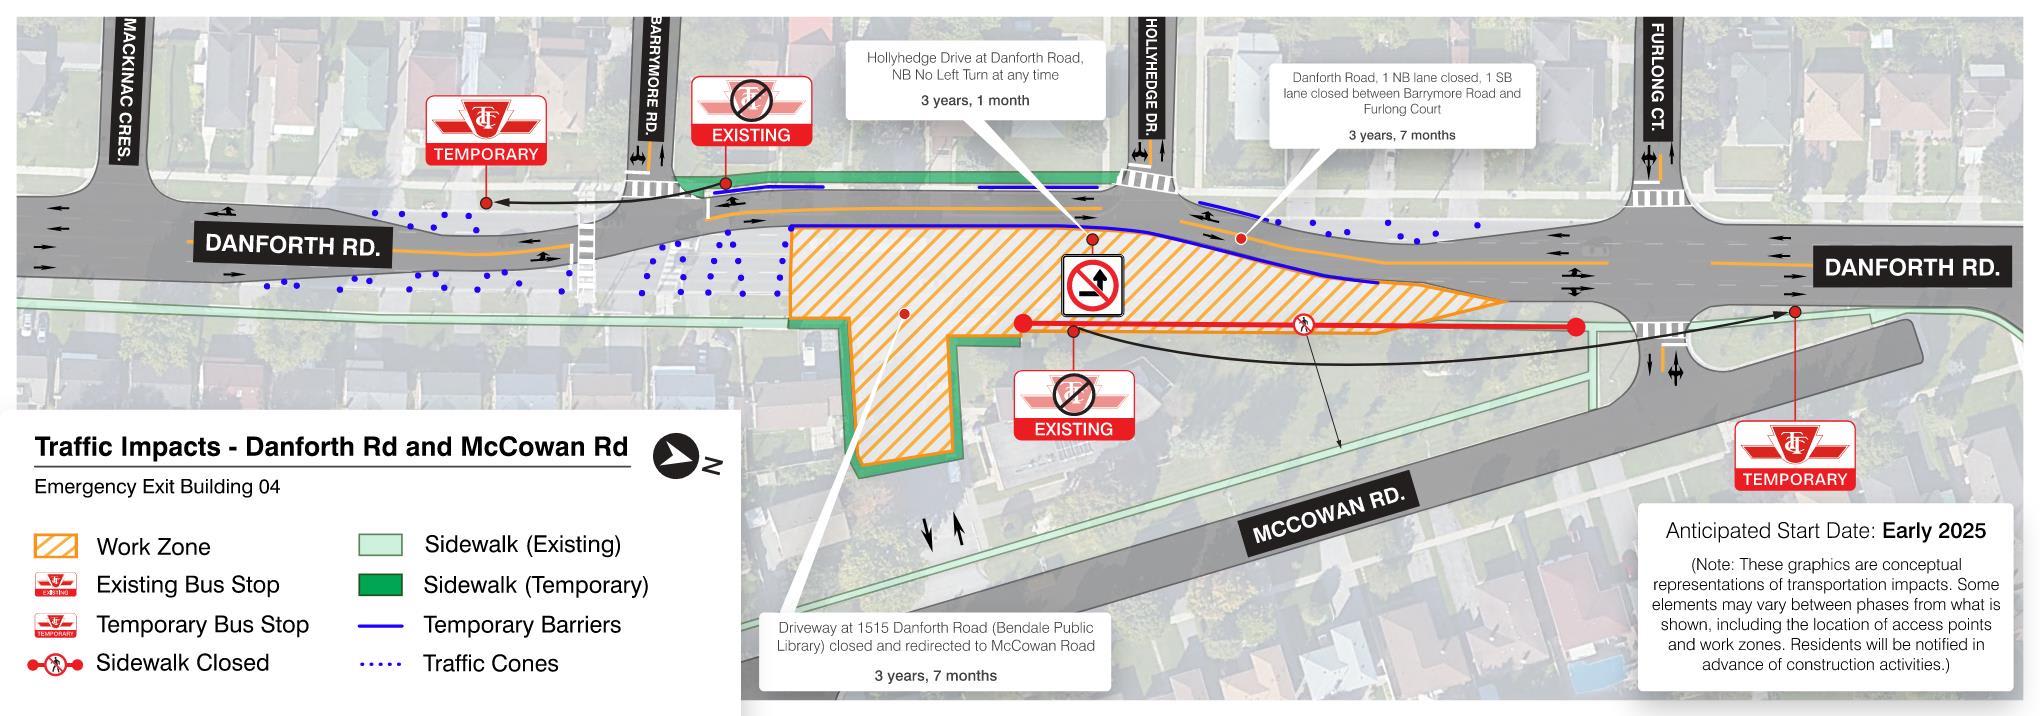 Danforth Rd and McCowan Rd – traffic management plan showing lane closures and alternative entr...